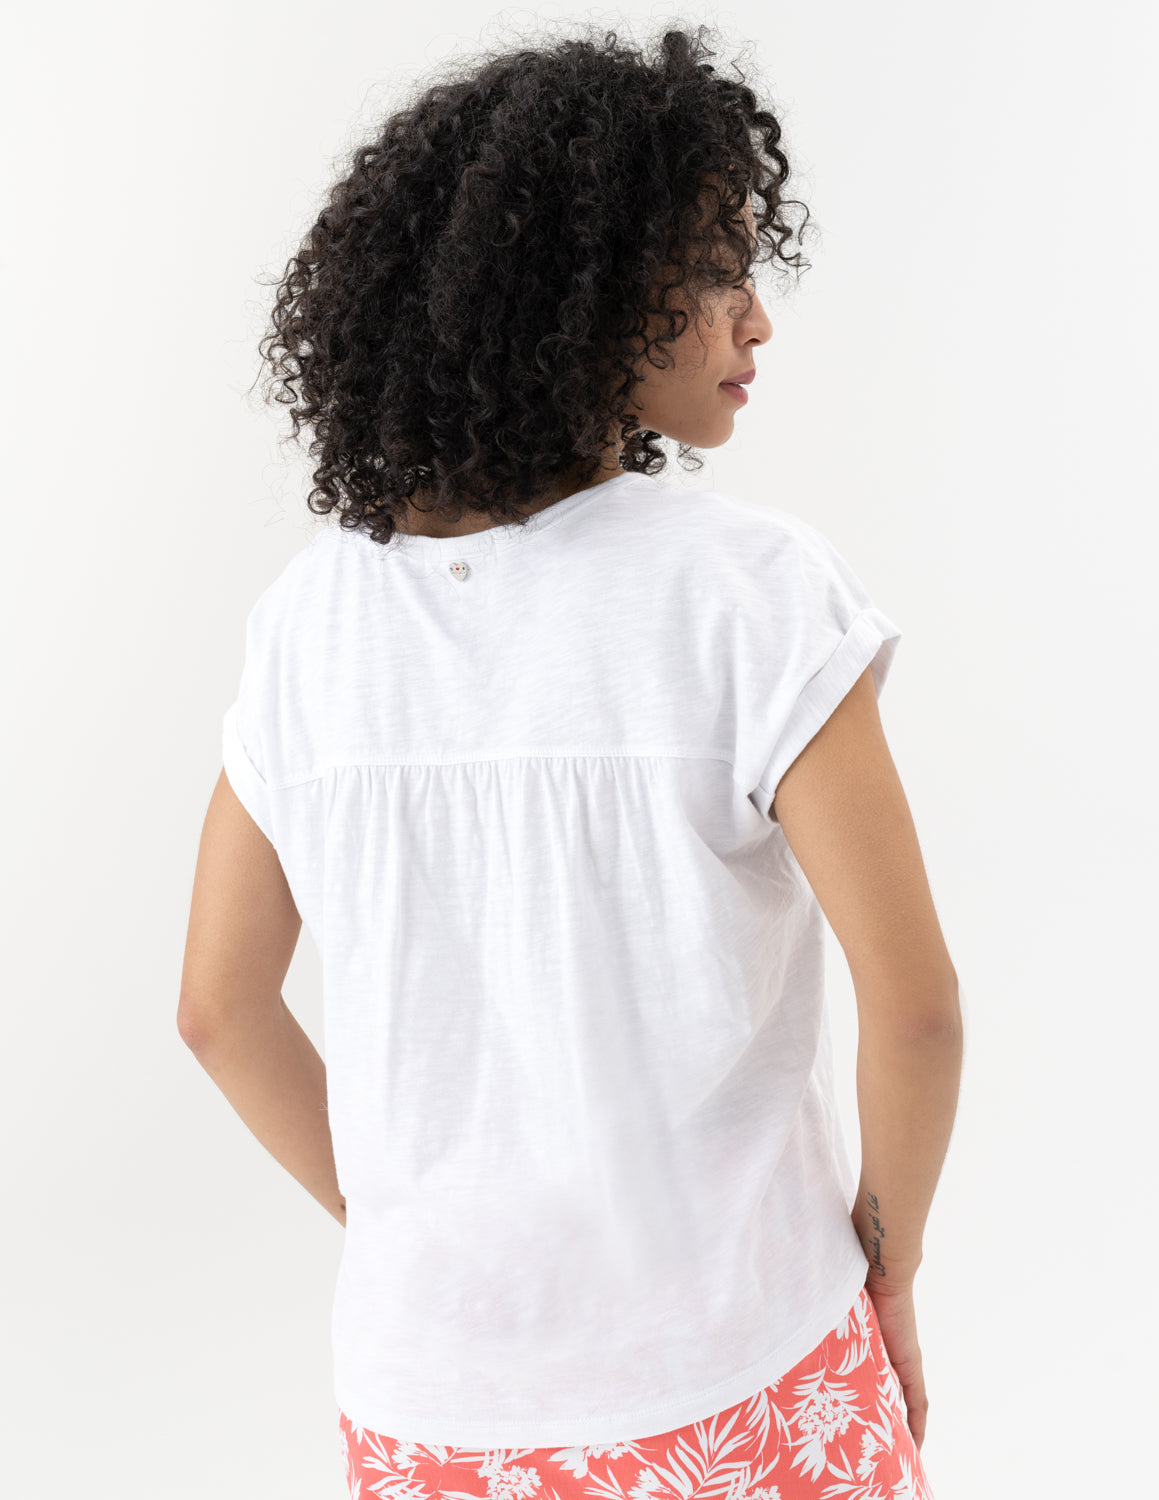 Tee with Gathered Back - White